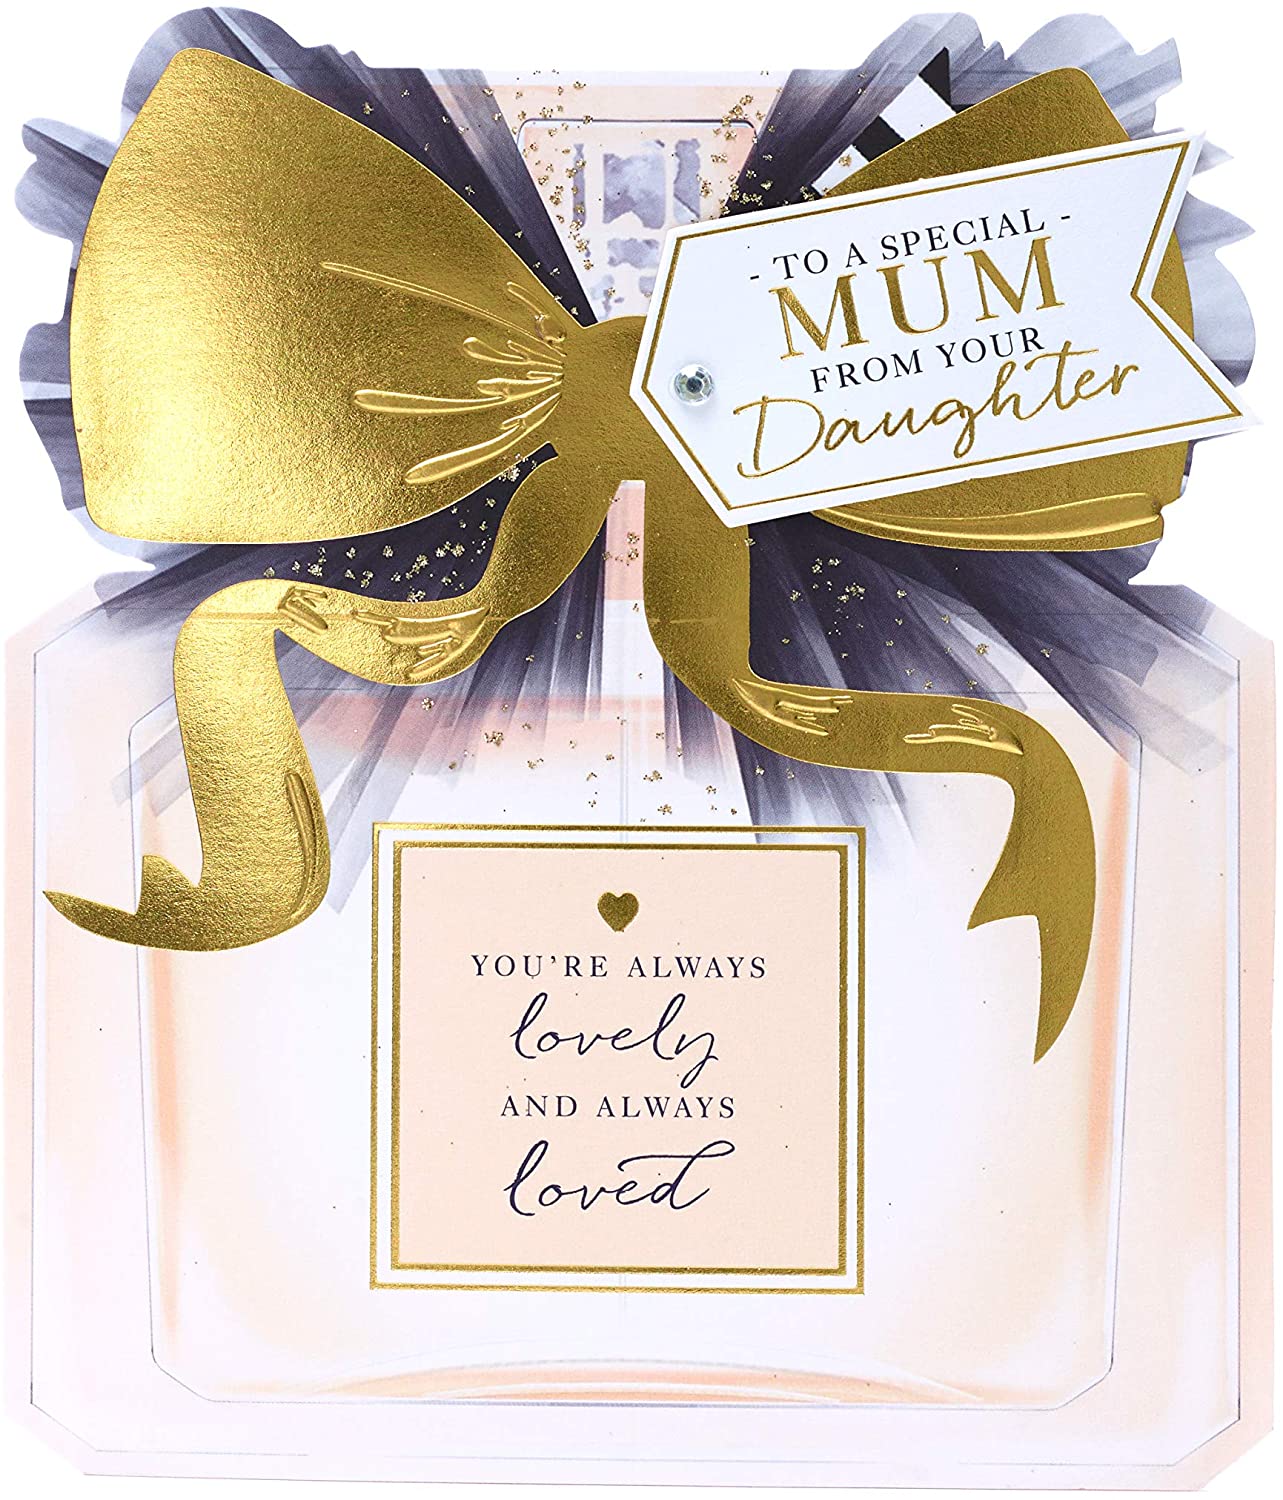 Special Mum From Your Daughter Perfume Bottle Design Mother's Day Card